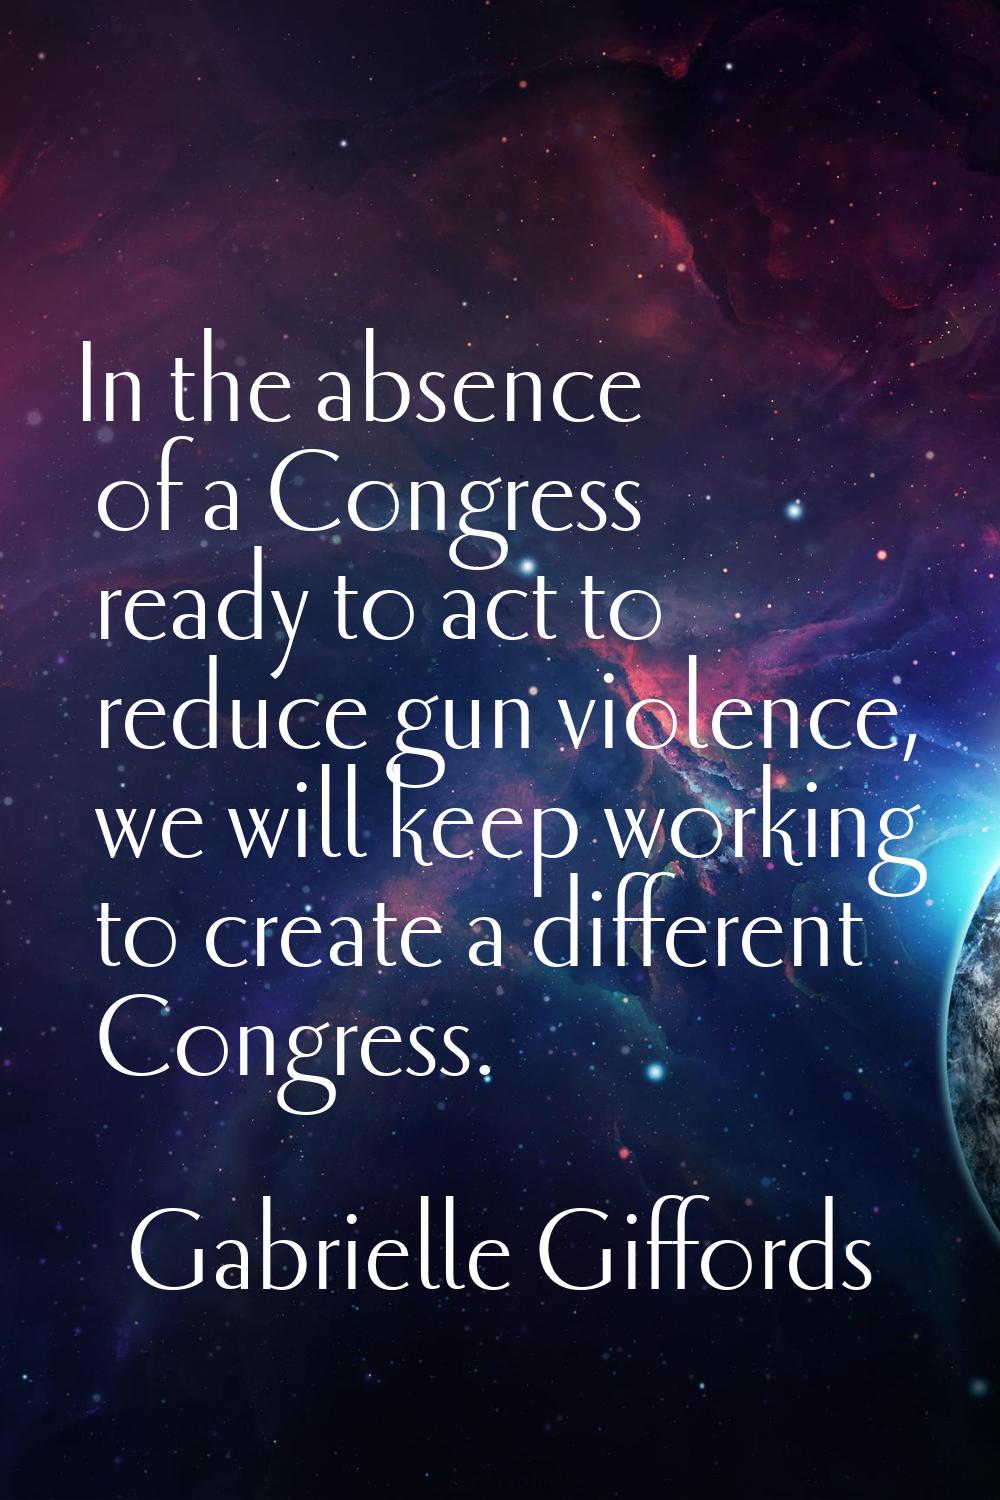 In the absence of a Congress ready to act to reduce gun violence, we will keep working to create a 